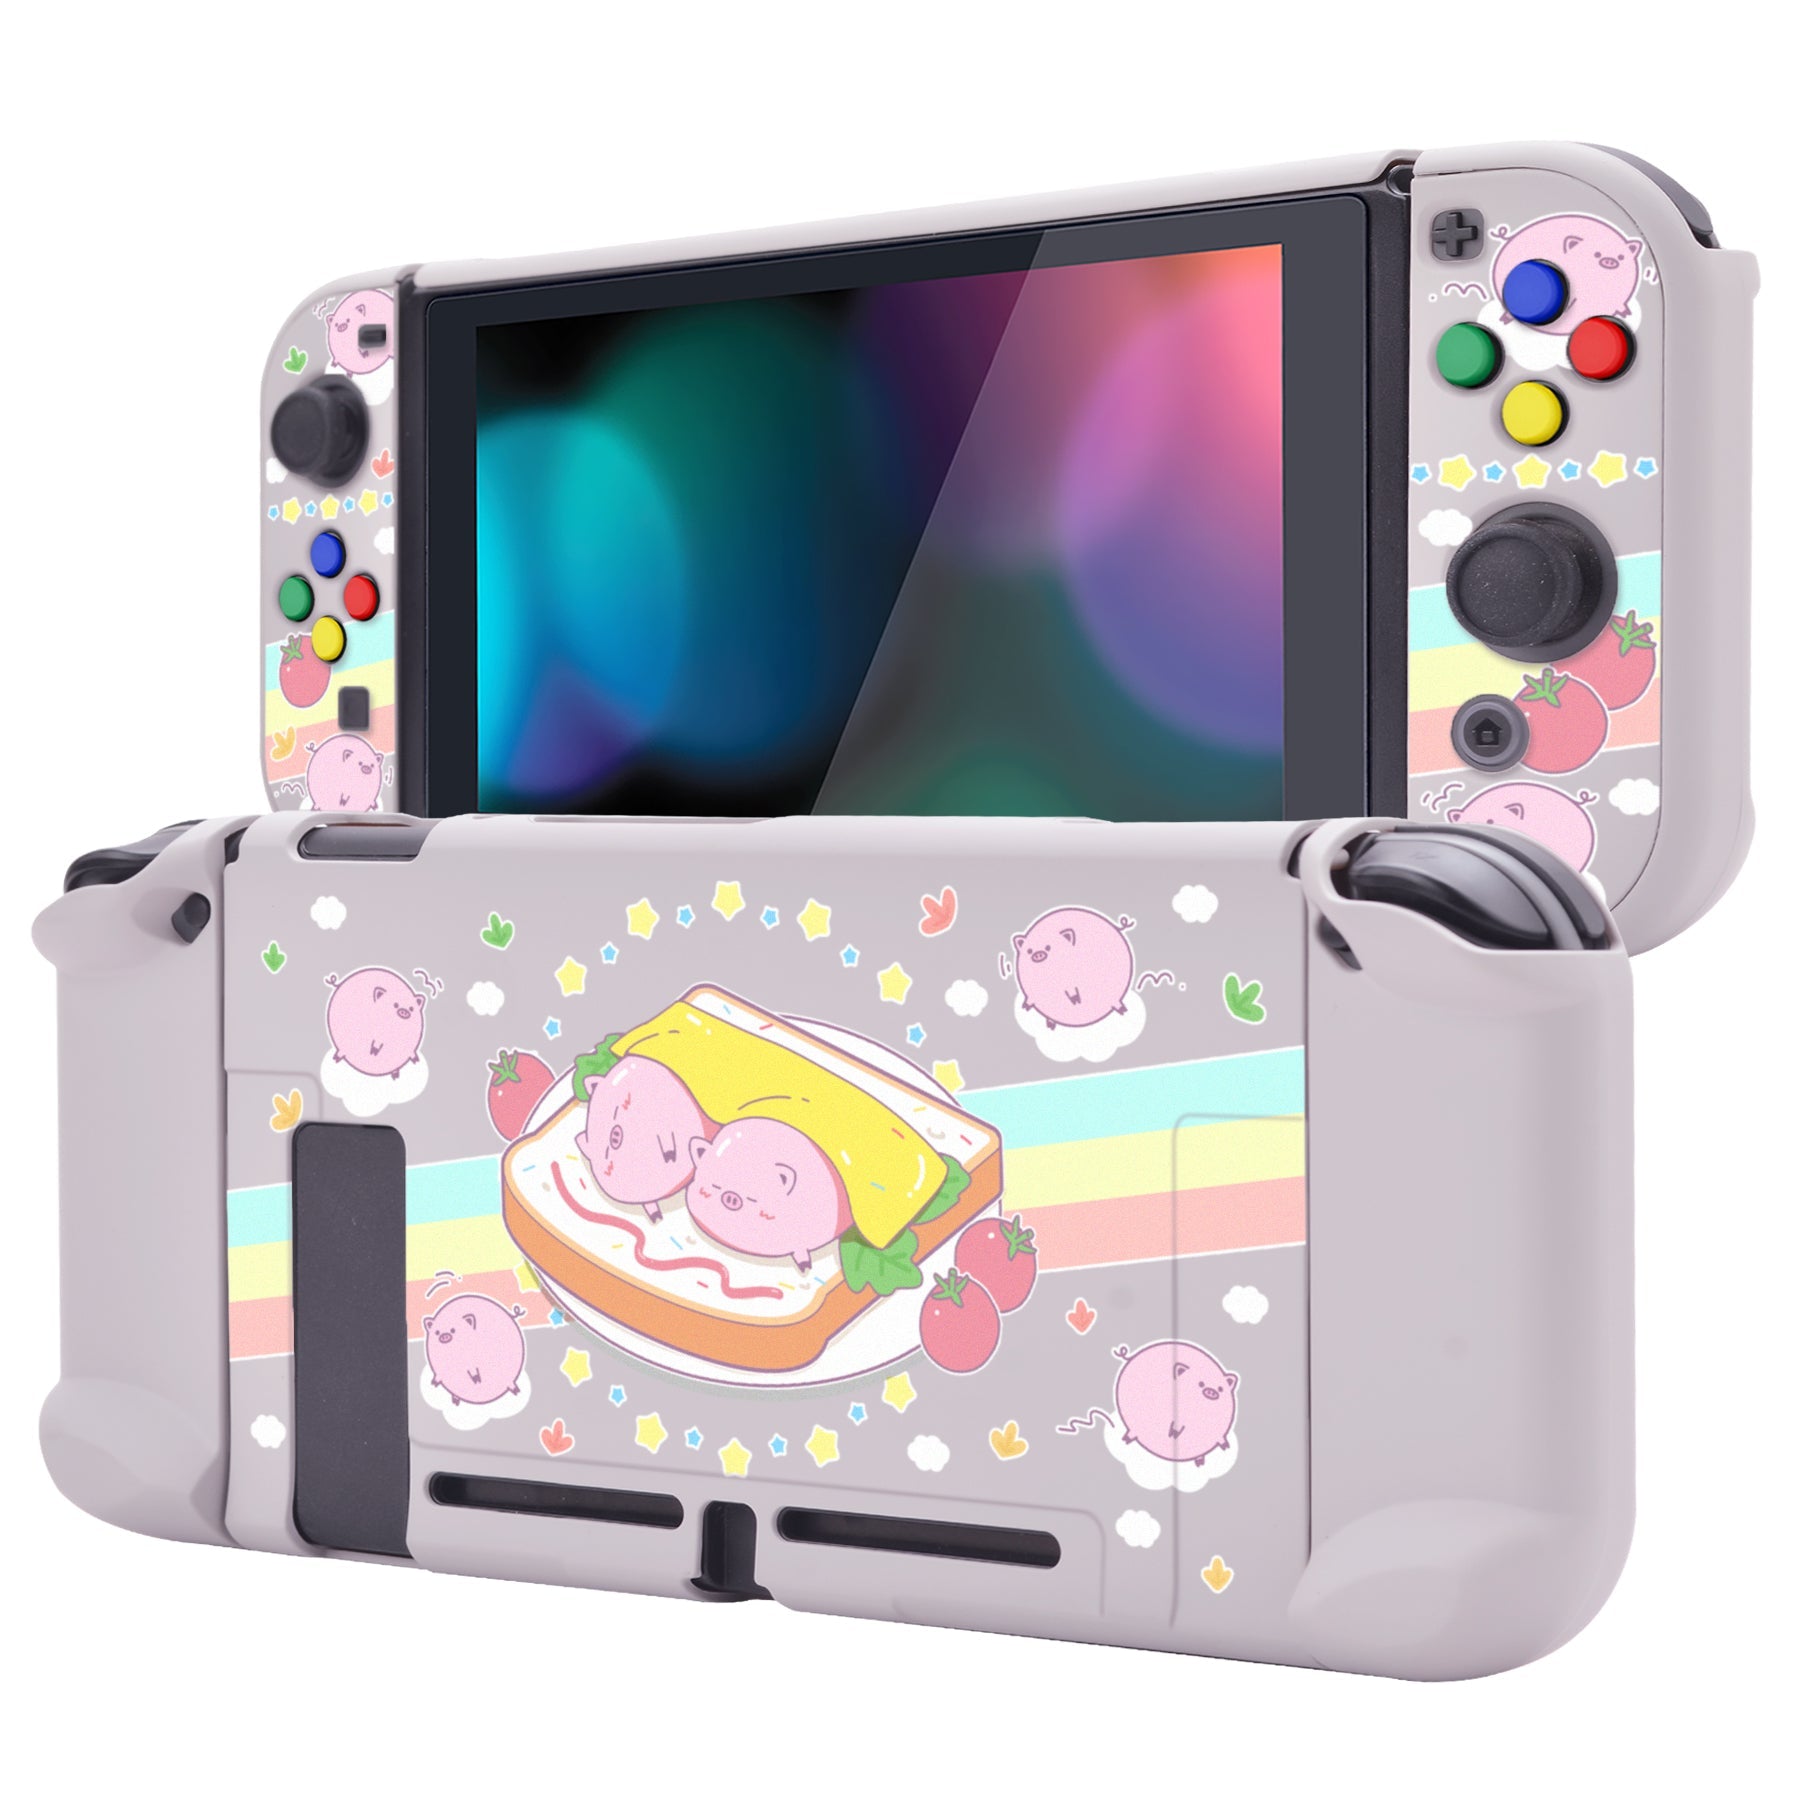 PlayVital Piggy Sandwich Back Cover for NS Switch Console, NS Joycon Handheld Controller Separable Protector Hard Shell, Dockable Protective Case with Colorful ABXY Direction Button Caps - NTT118 PlayVital